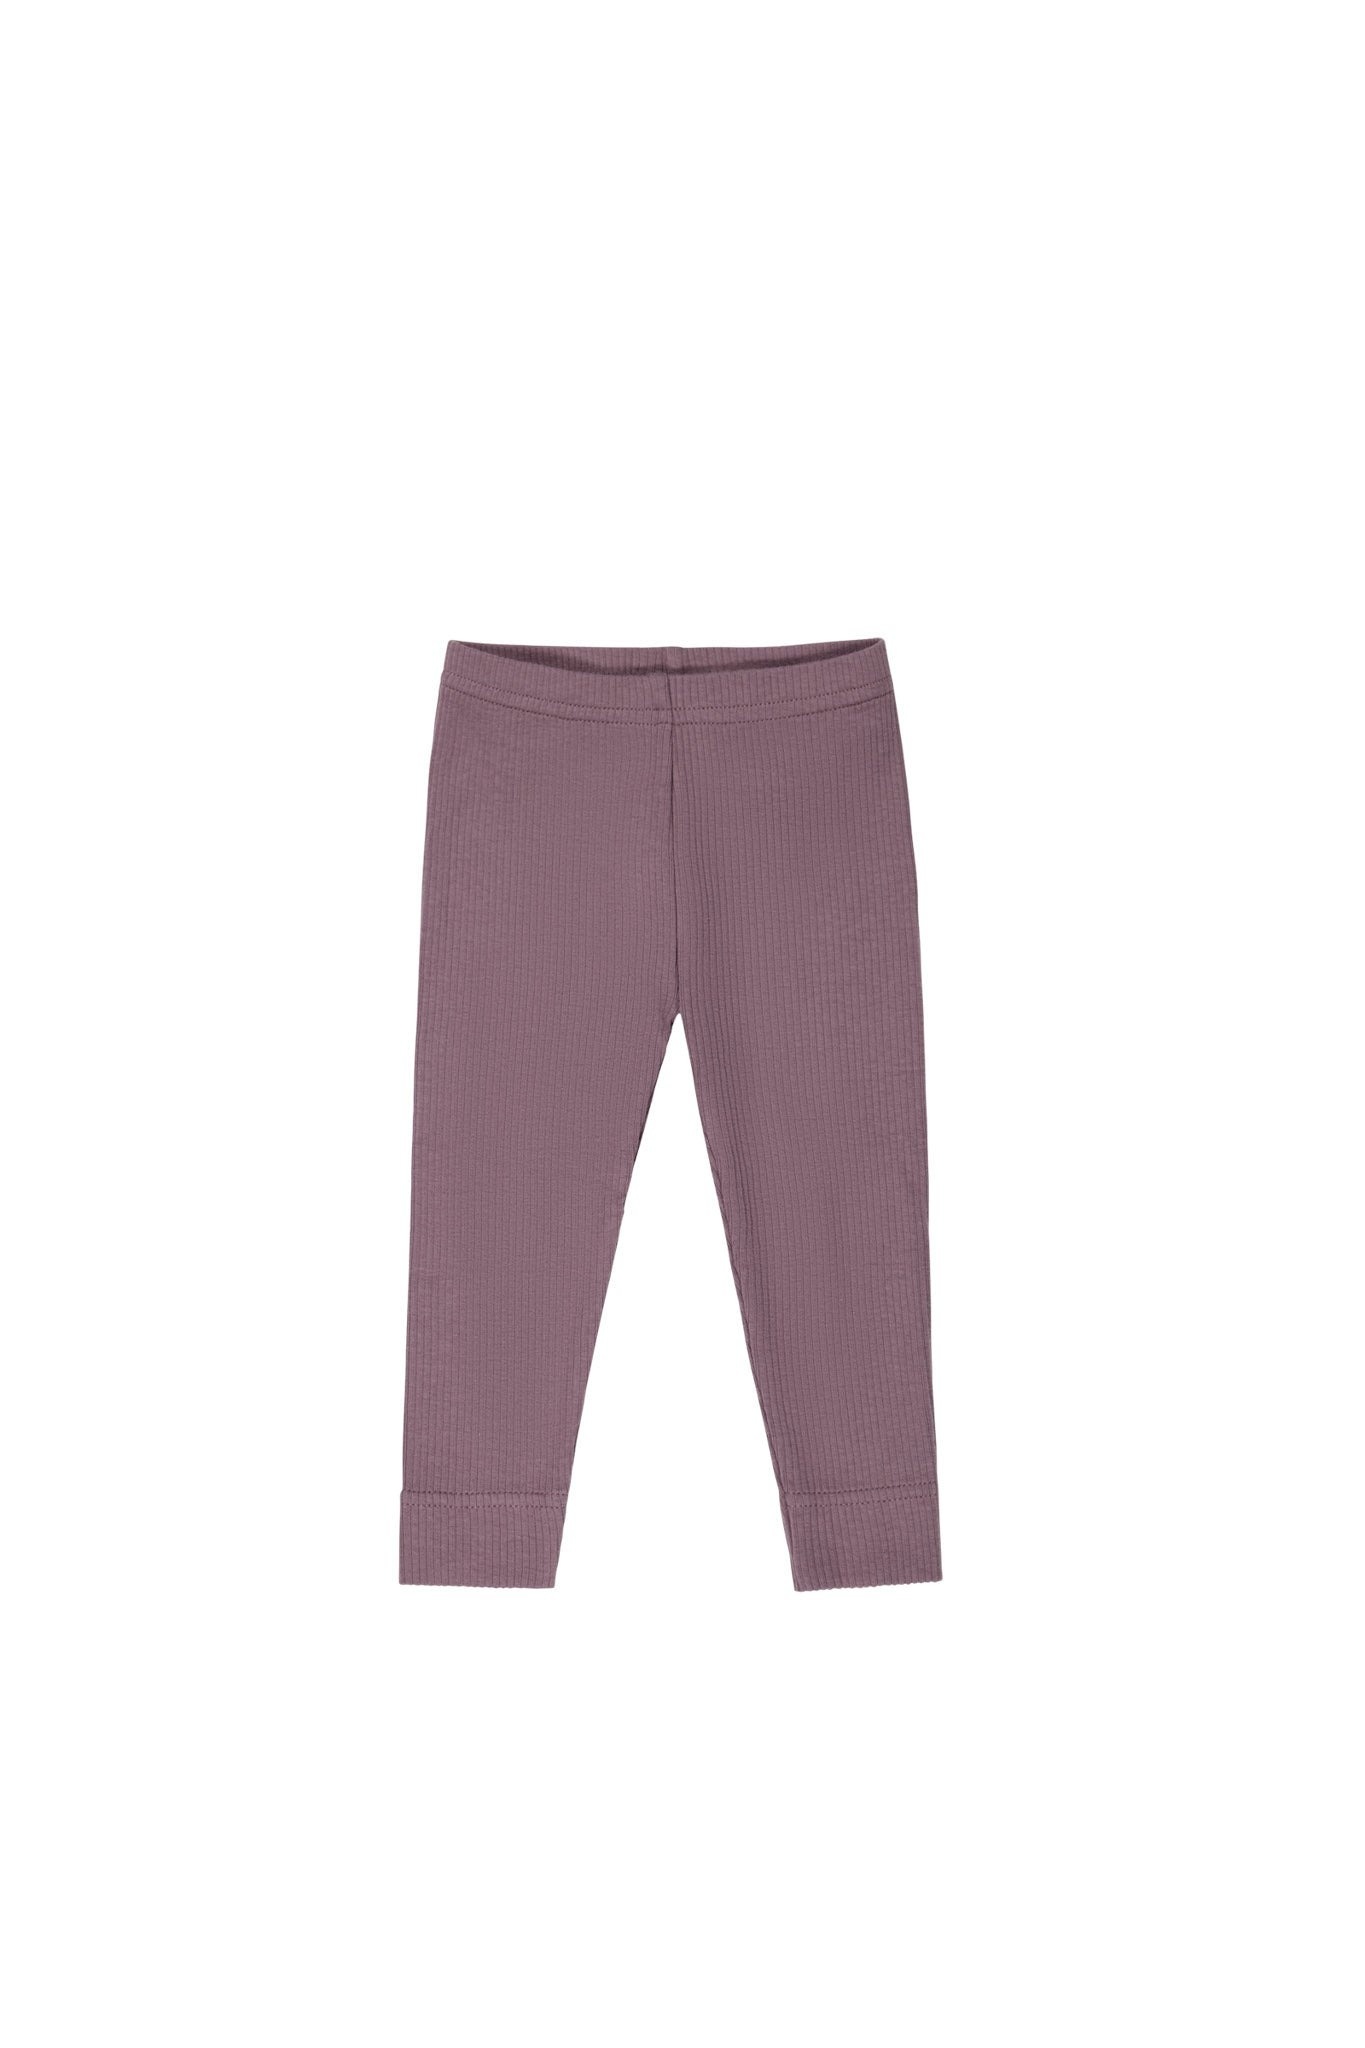 Organic Cotton Modal Everyday Leggings by Jamie Kay - Abby Sprouts